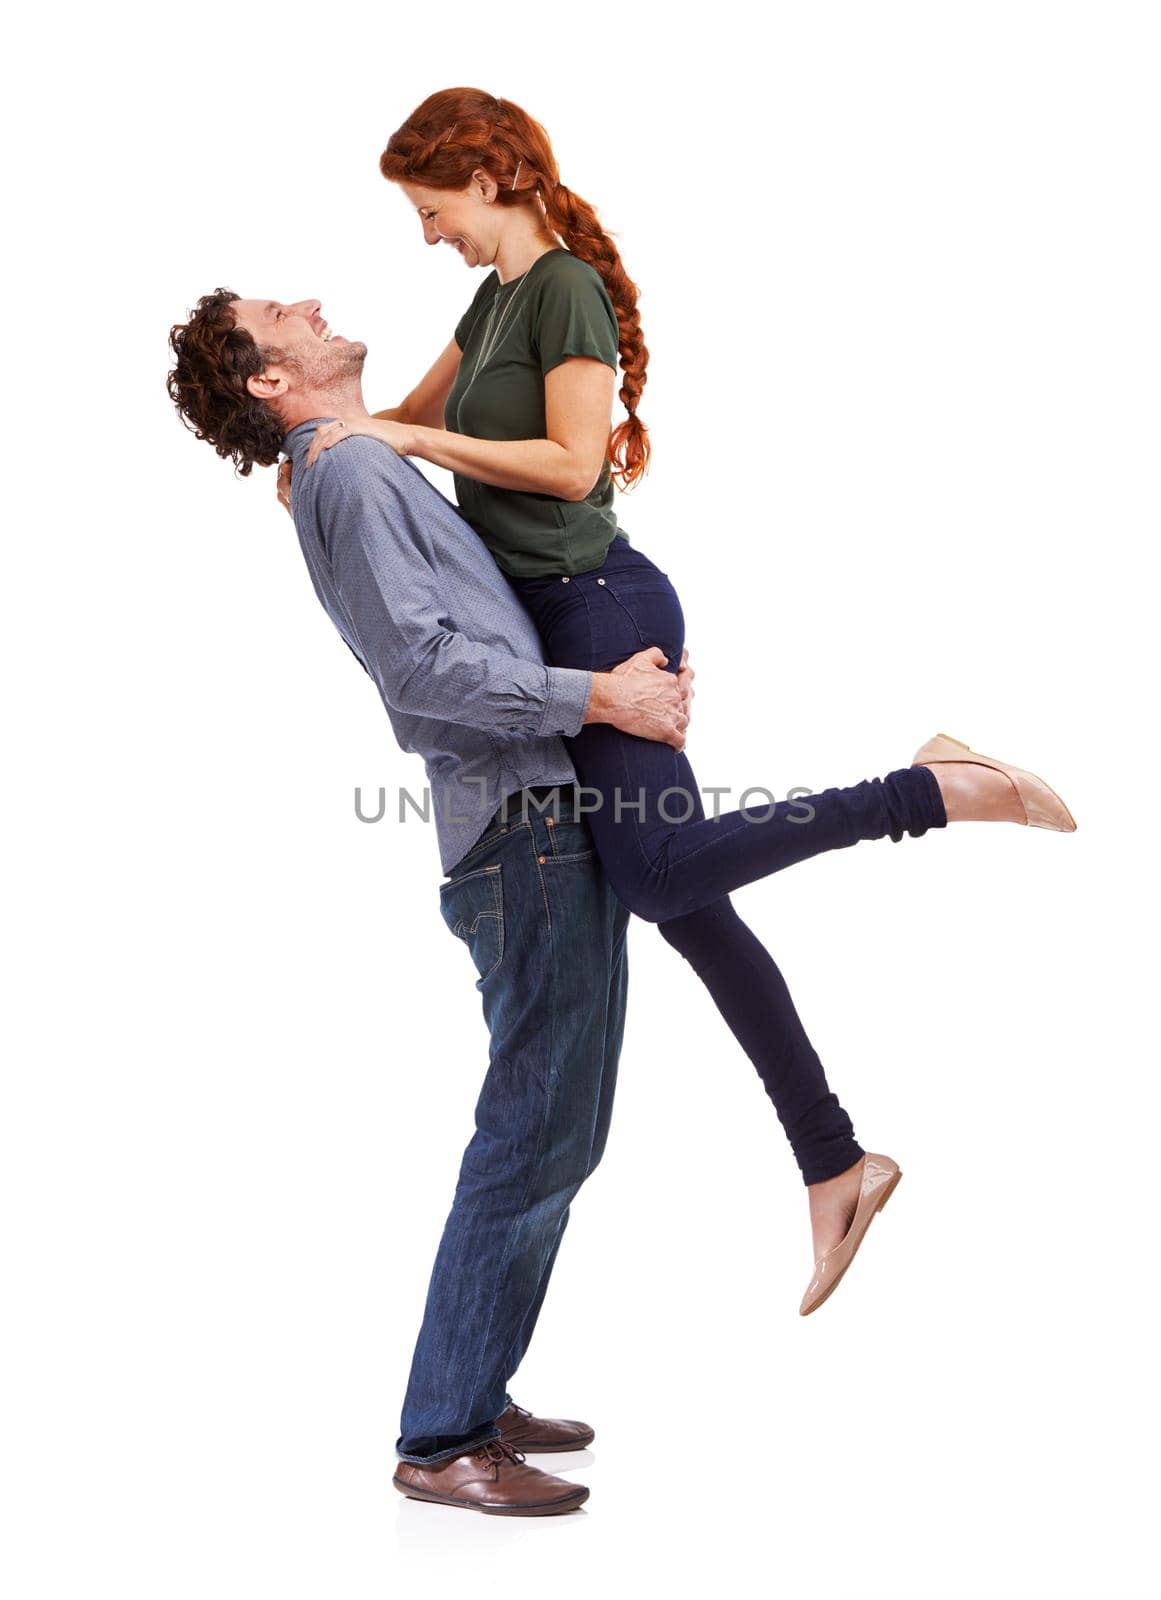 Love makes them feel alive. Full-length studio shot of a handsome man lifting up his girlfriend